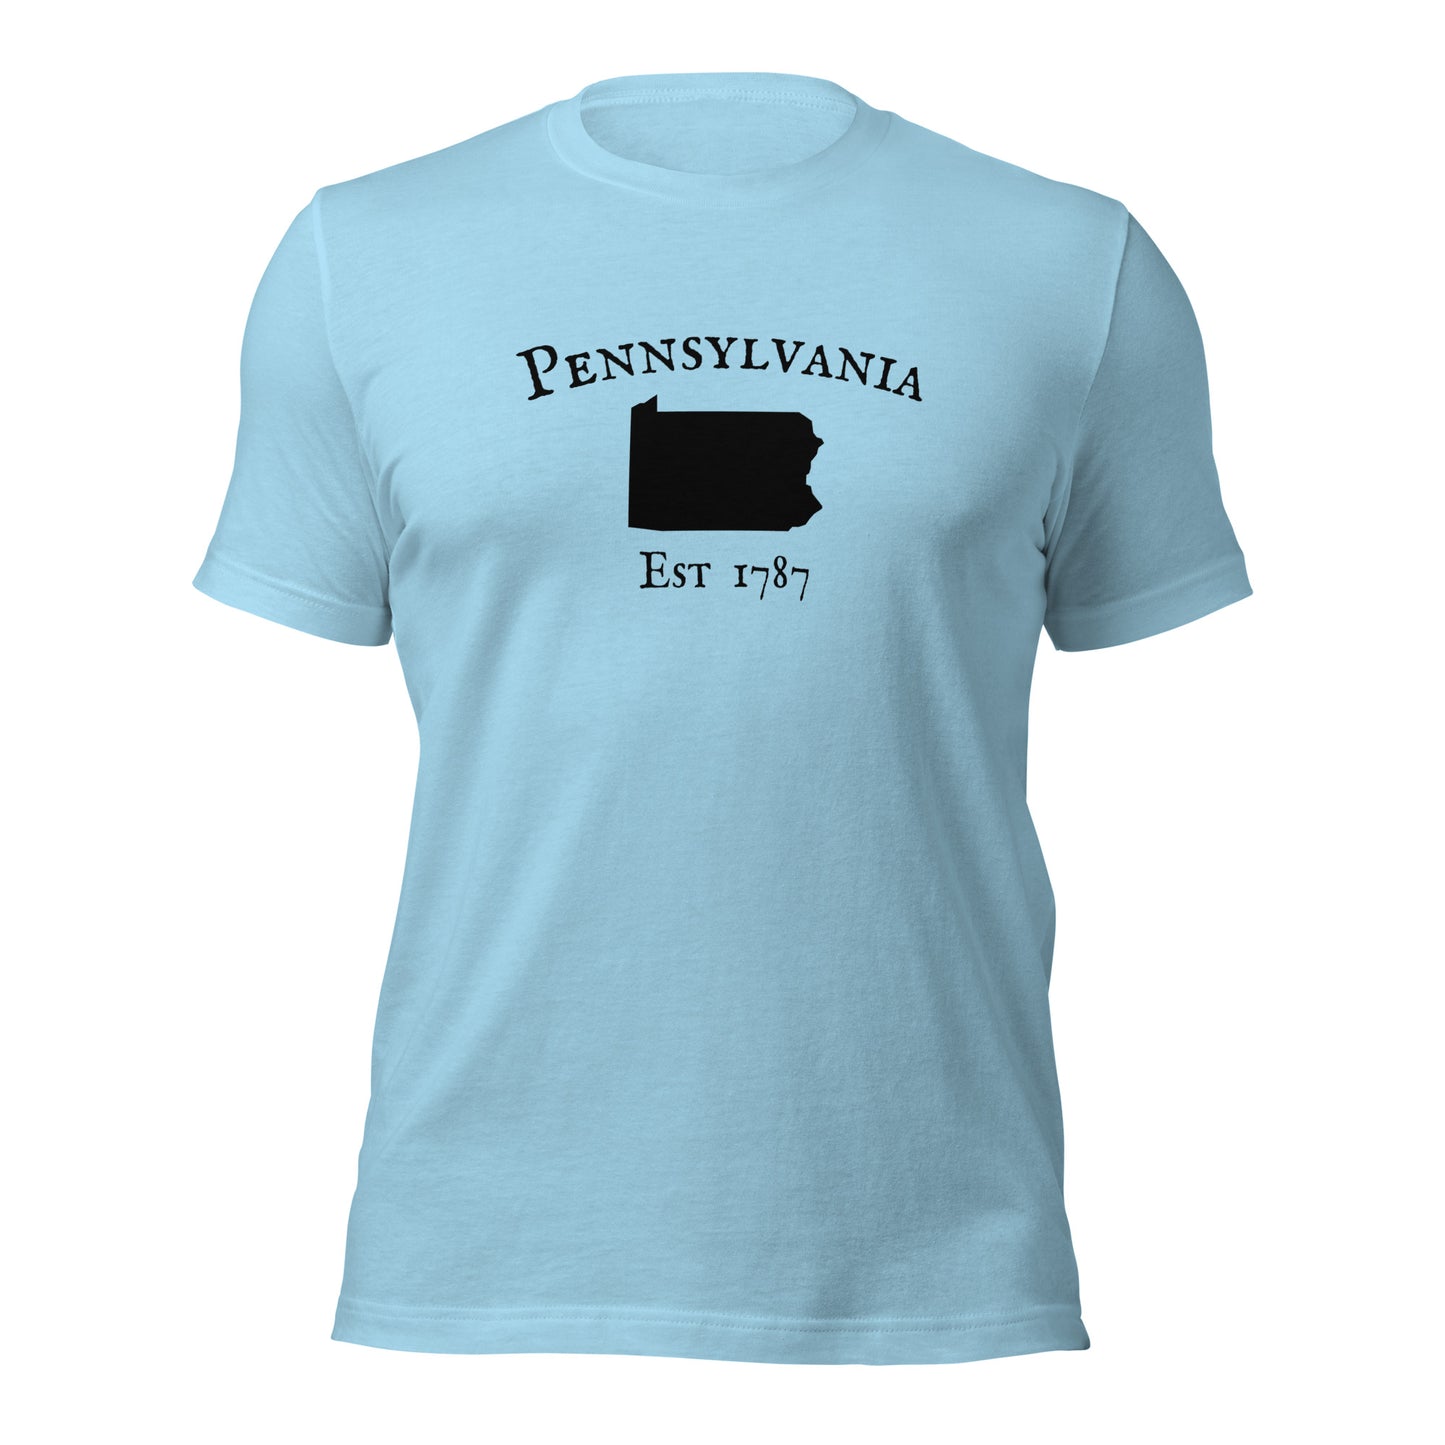 "Pennsylvania Established In 1787" T-Shirt - Weave Got Gifts - Unique Gifts You Won’t Find Anywhere Else!